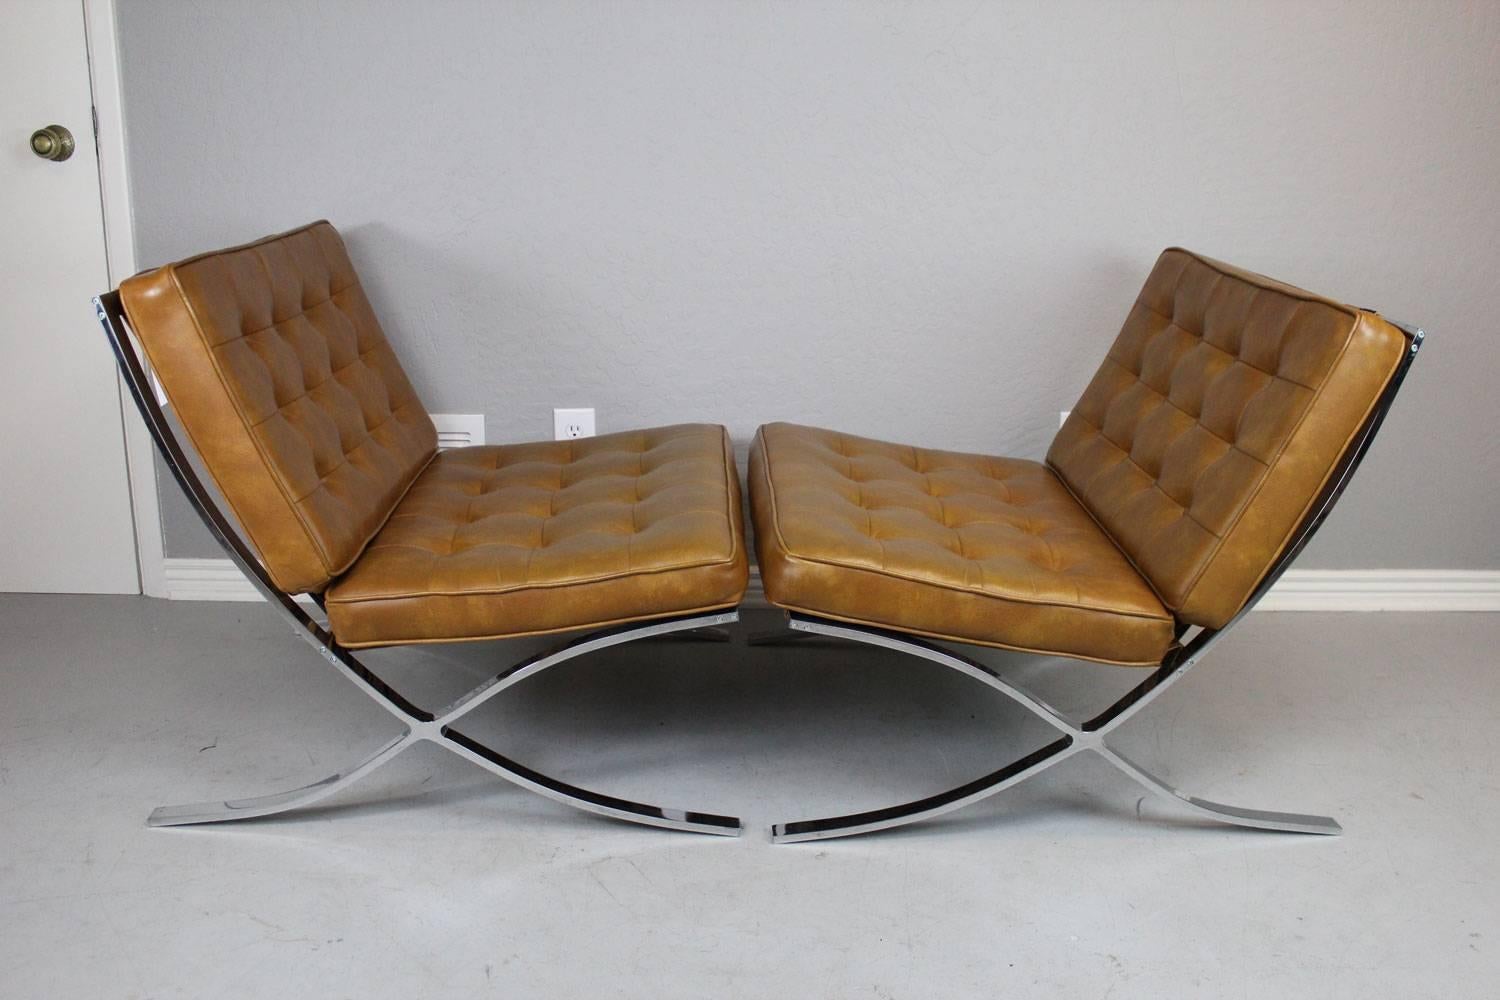 Barcelona style lounge chair pair and ottoman in caramel Naugahyde, circa 1960s. All straps in exceptional condition and no rips, tears, or holes in Naugahyde. A very nice reproduction set. The stainless steel construction of these units is heavy